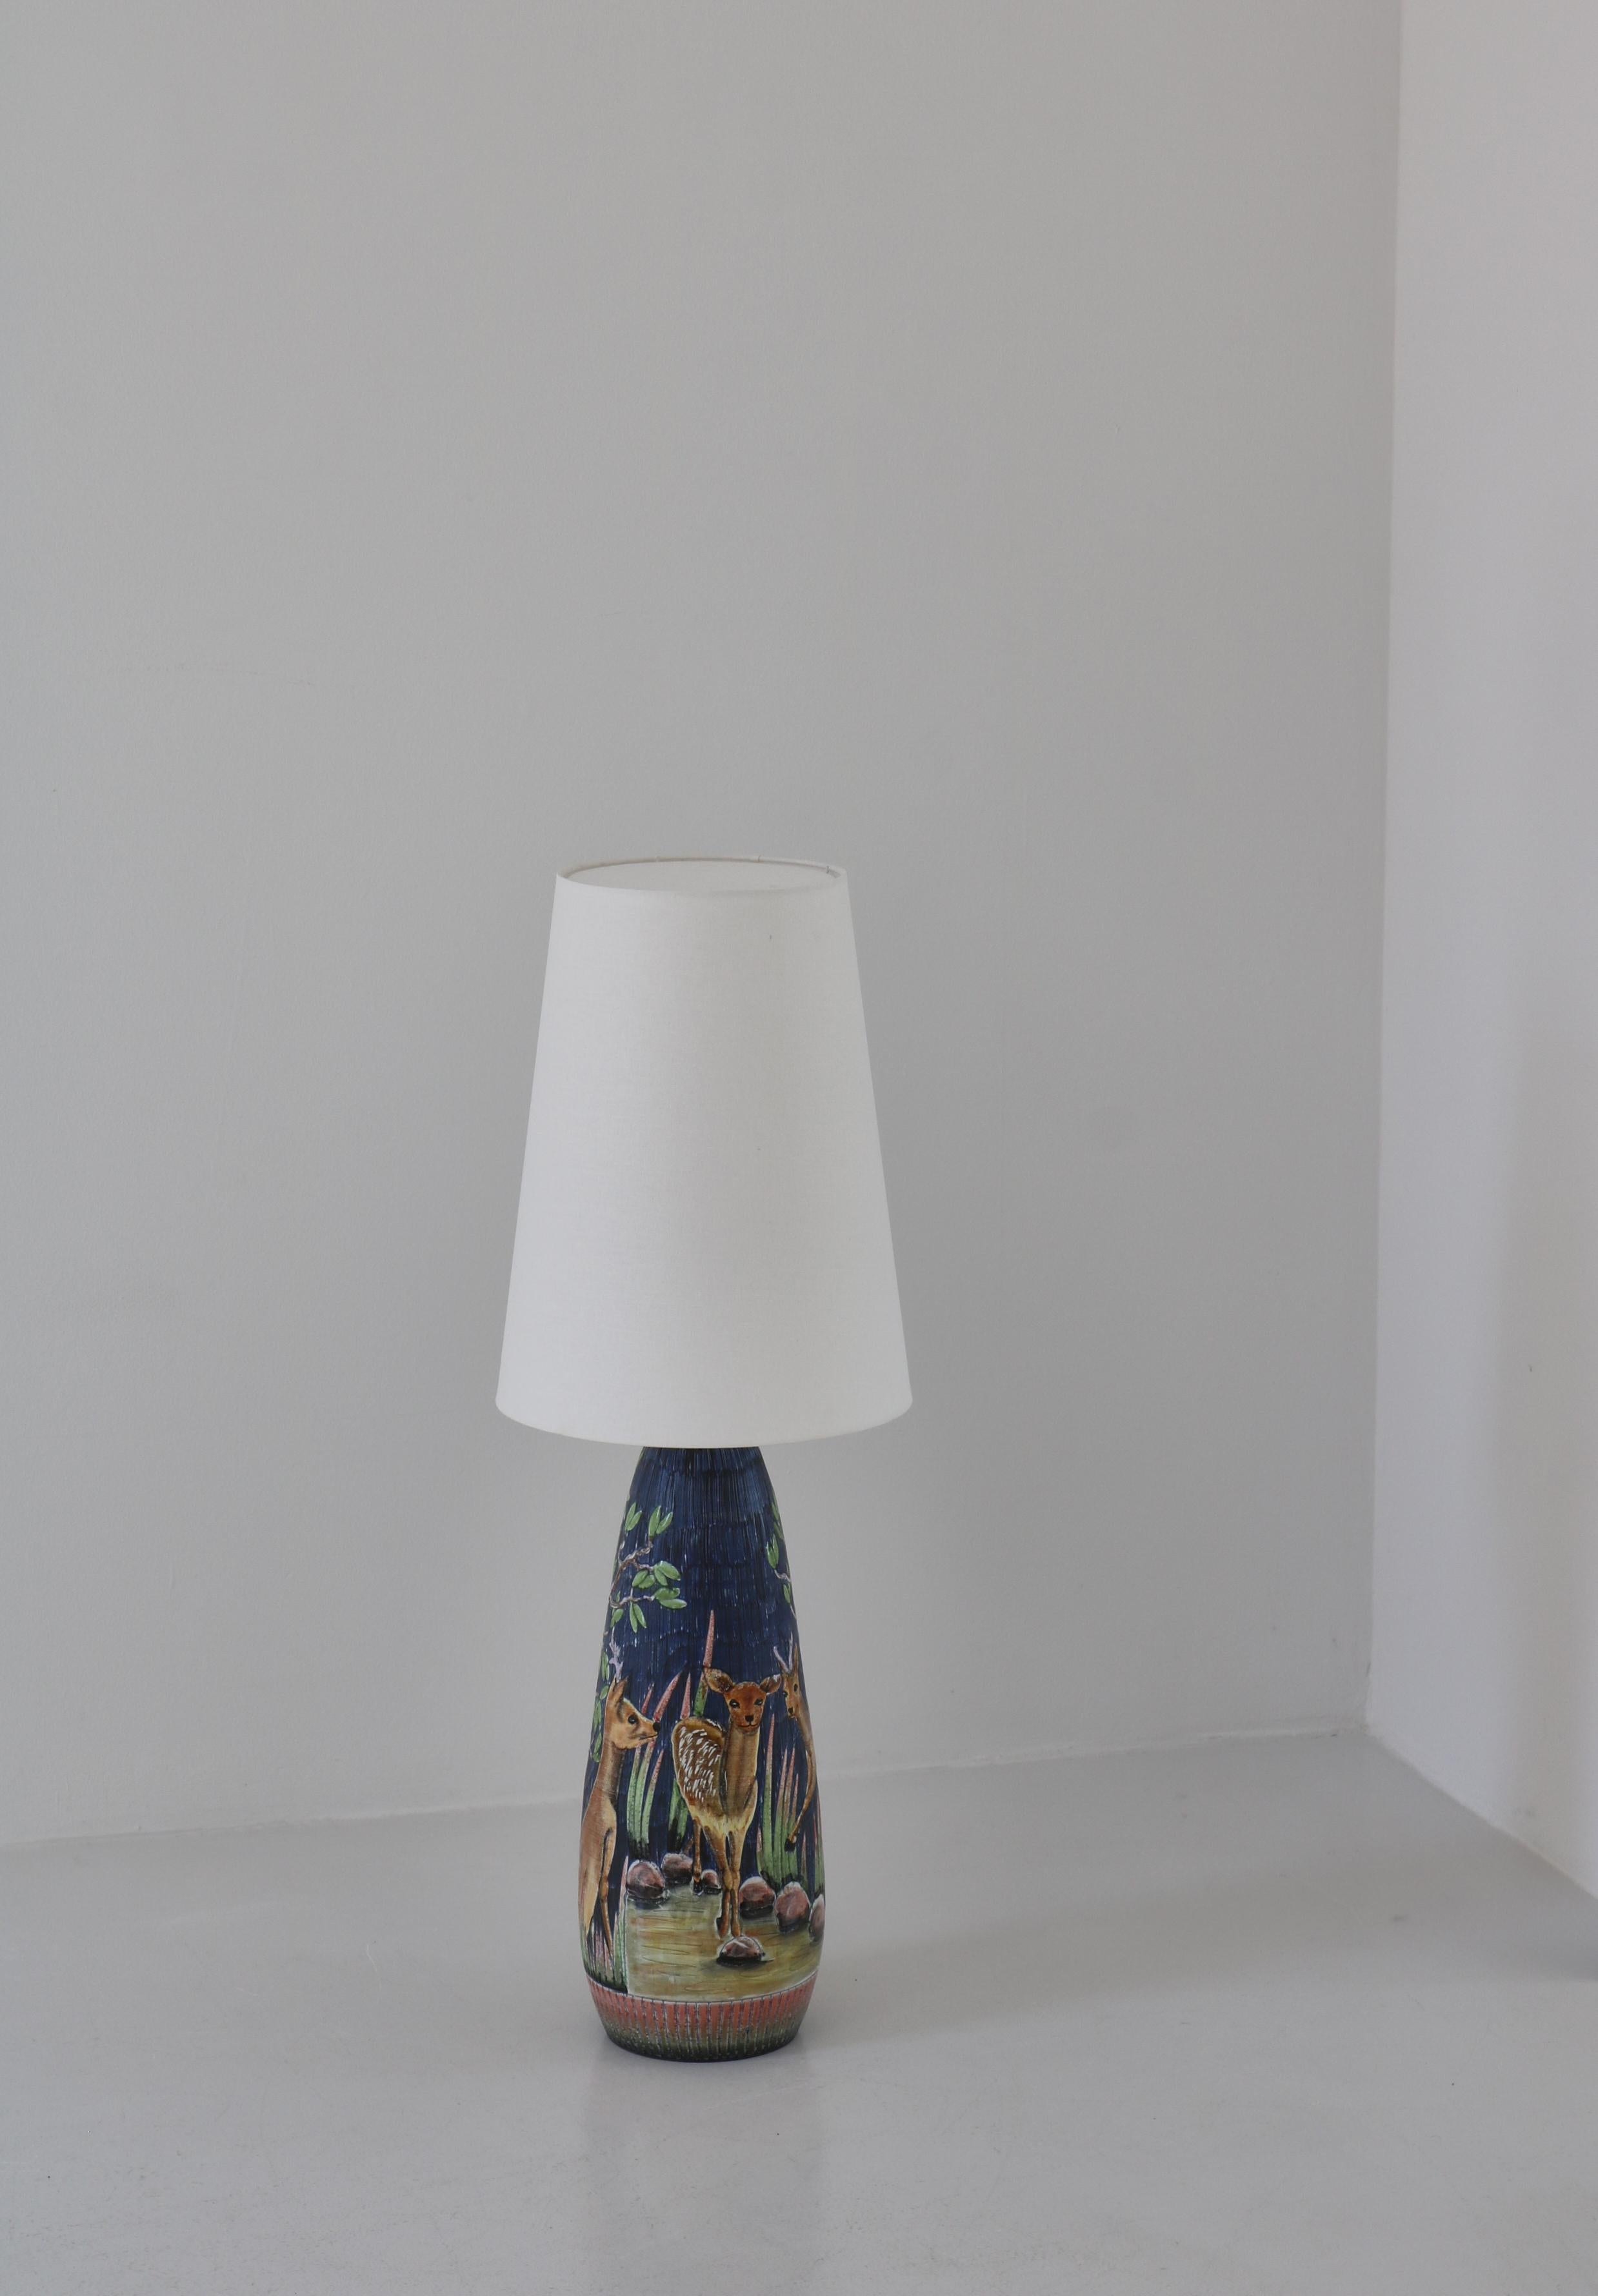 Large Scandinavian Modern Ceramics Table Lamp by Ulla Winblad, Sweden, 1960s In Good Condition For Sale In Odense, DK